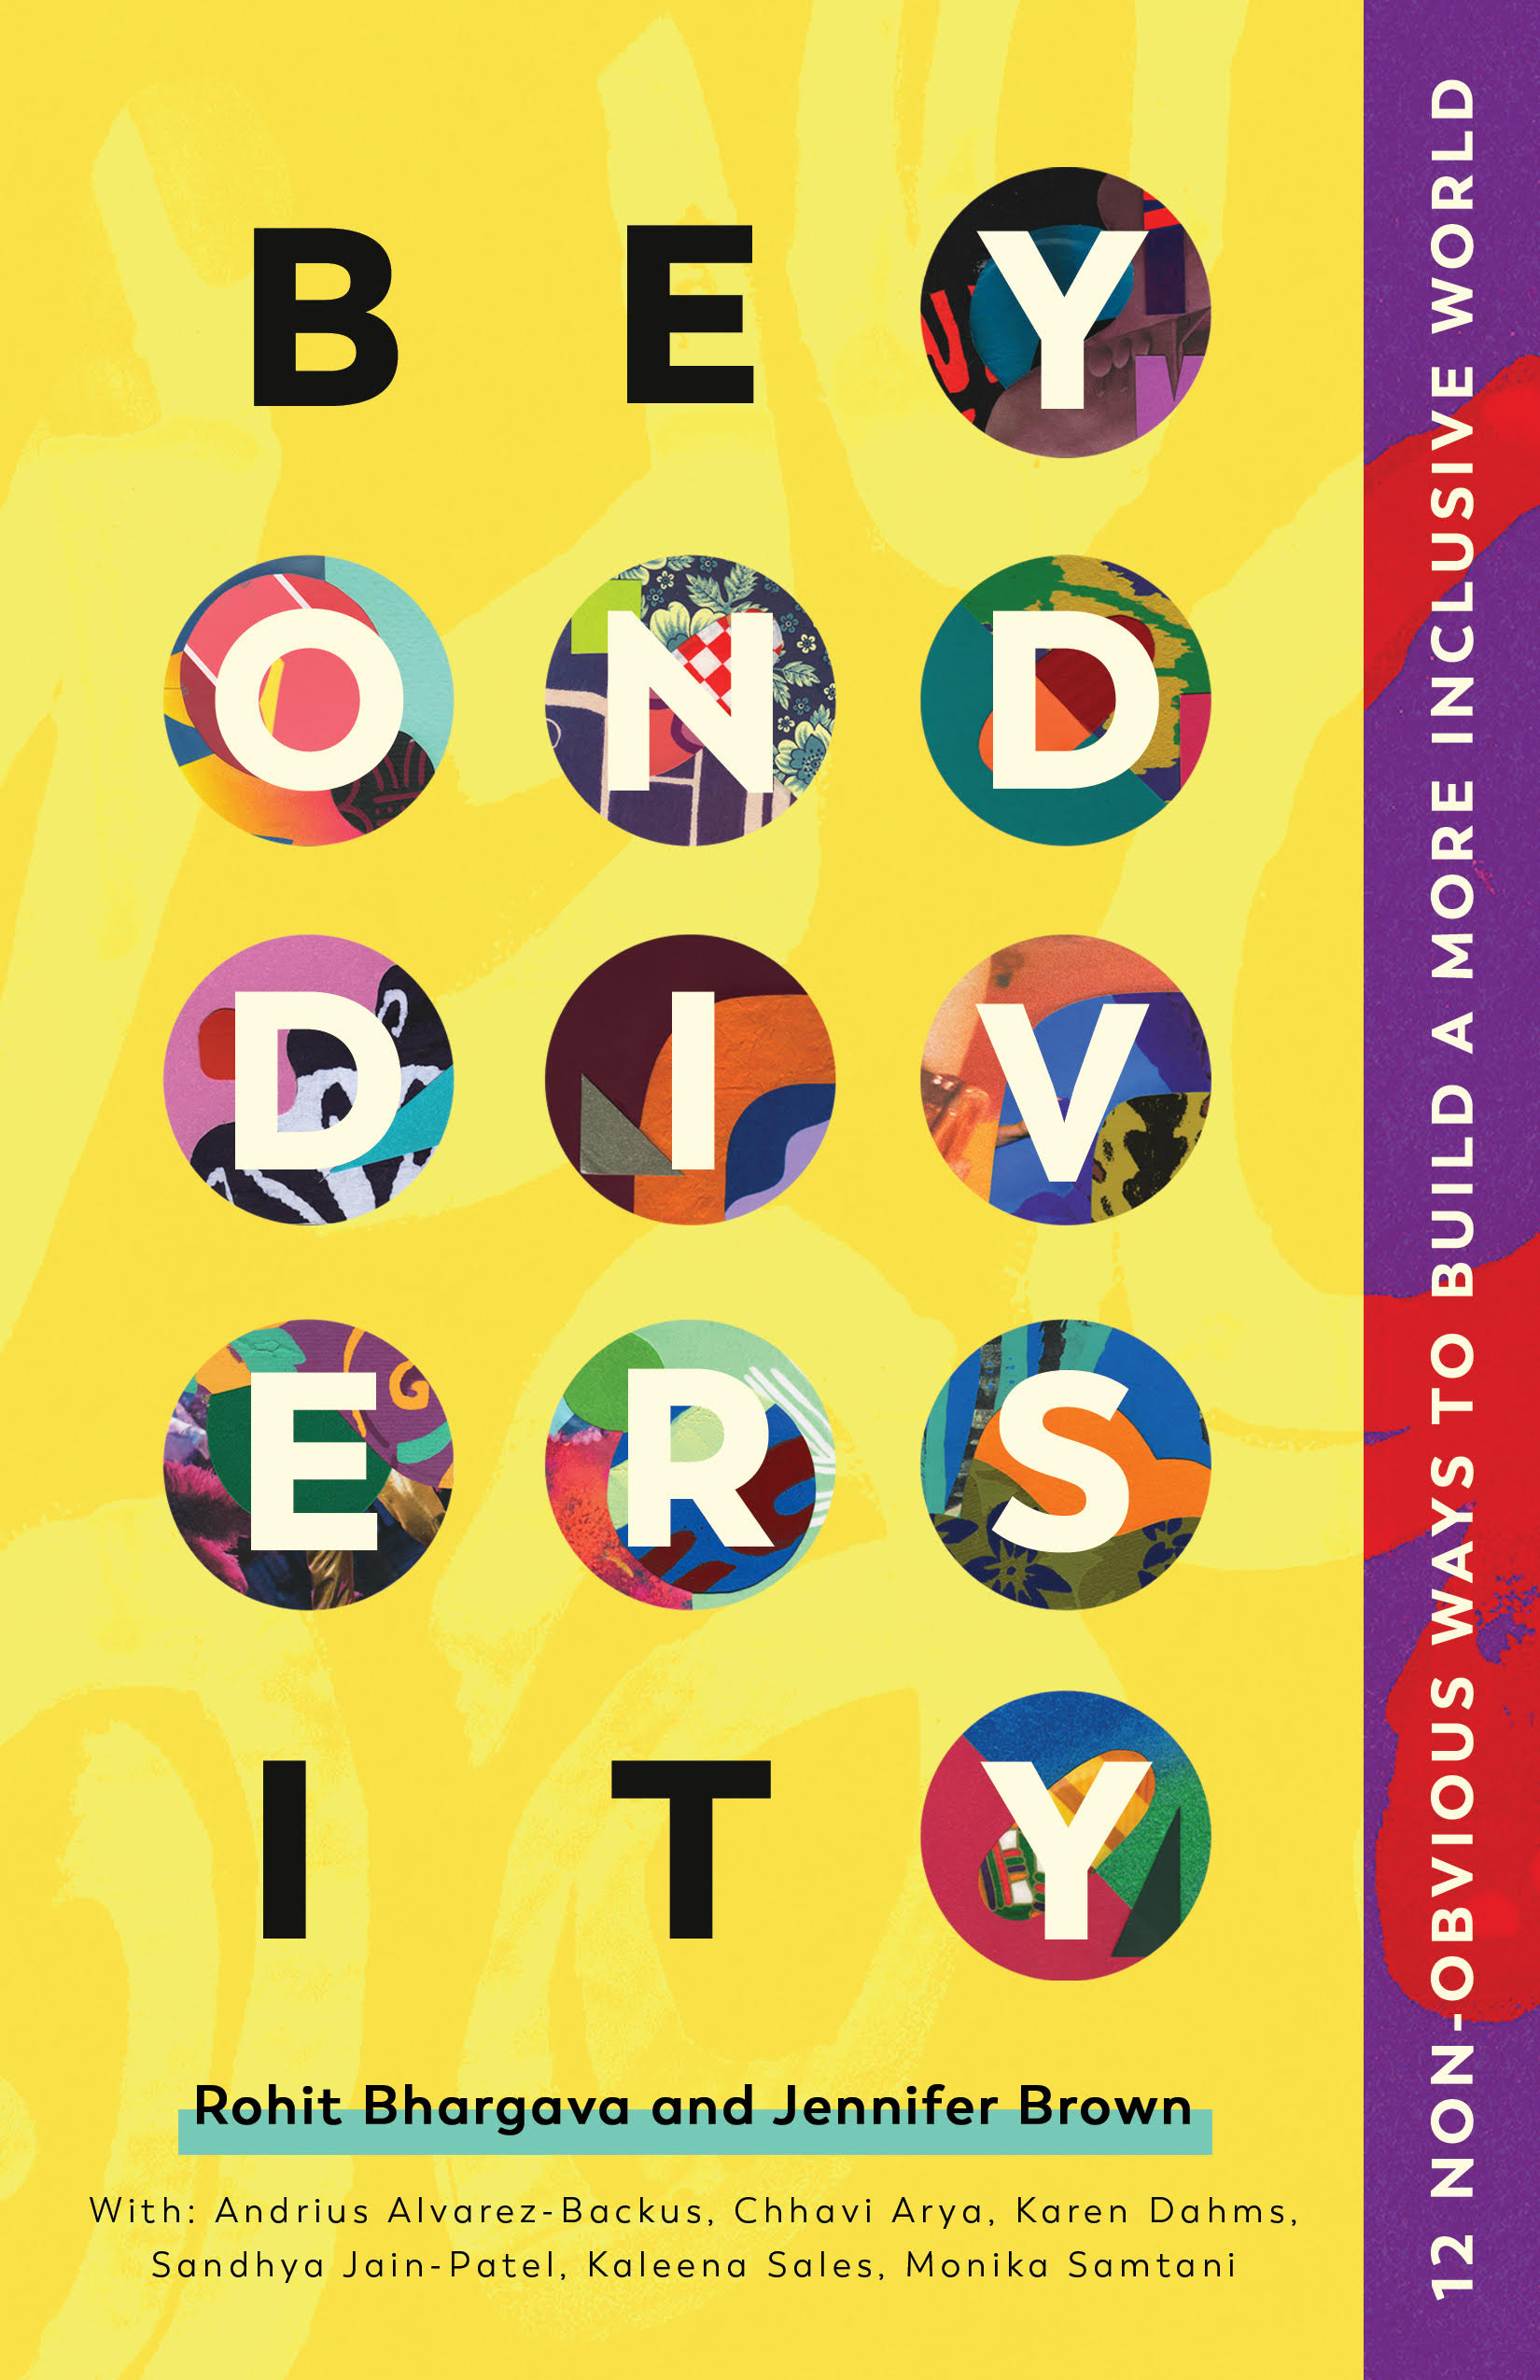 Beyond Diversity Book Cover - Yellow background with five rows of three circles each with a different letter of the title juxtaposed on top of a colorful circle containing piece of mosaic art. The letters "B" and "E" on the top line and the letters "I" and "T" on the last line are in black without a background mosaic, spelling the hidden message "BE IT" as a reminder to the reader that the book is meant to inspire them to take action to help build a more inclusive world. 